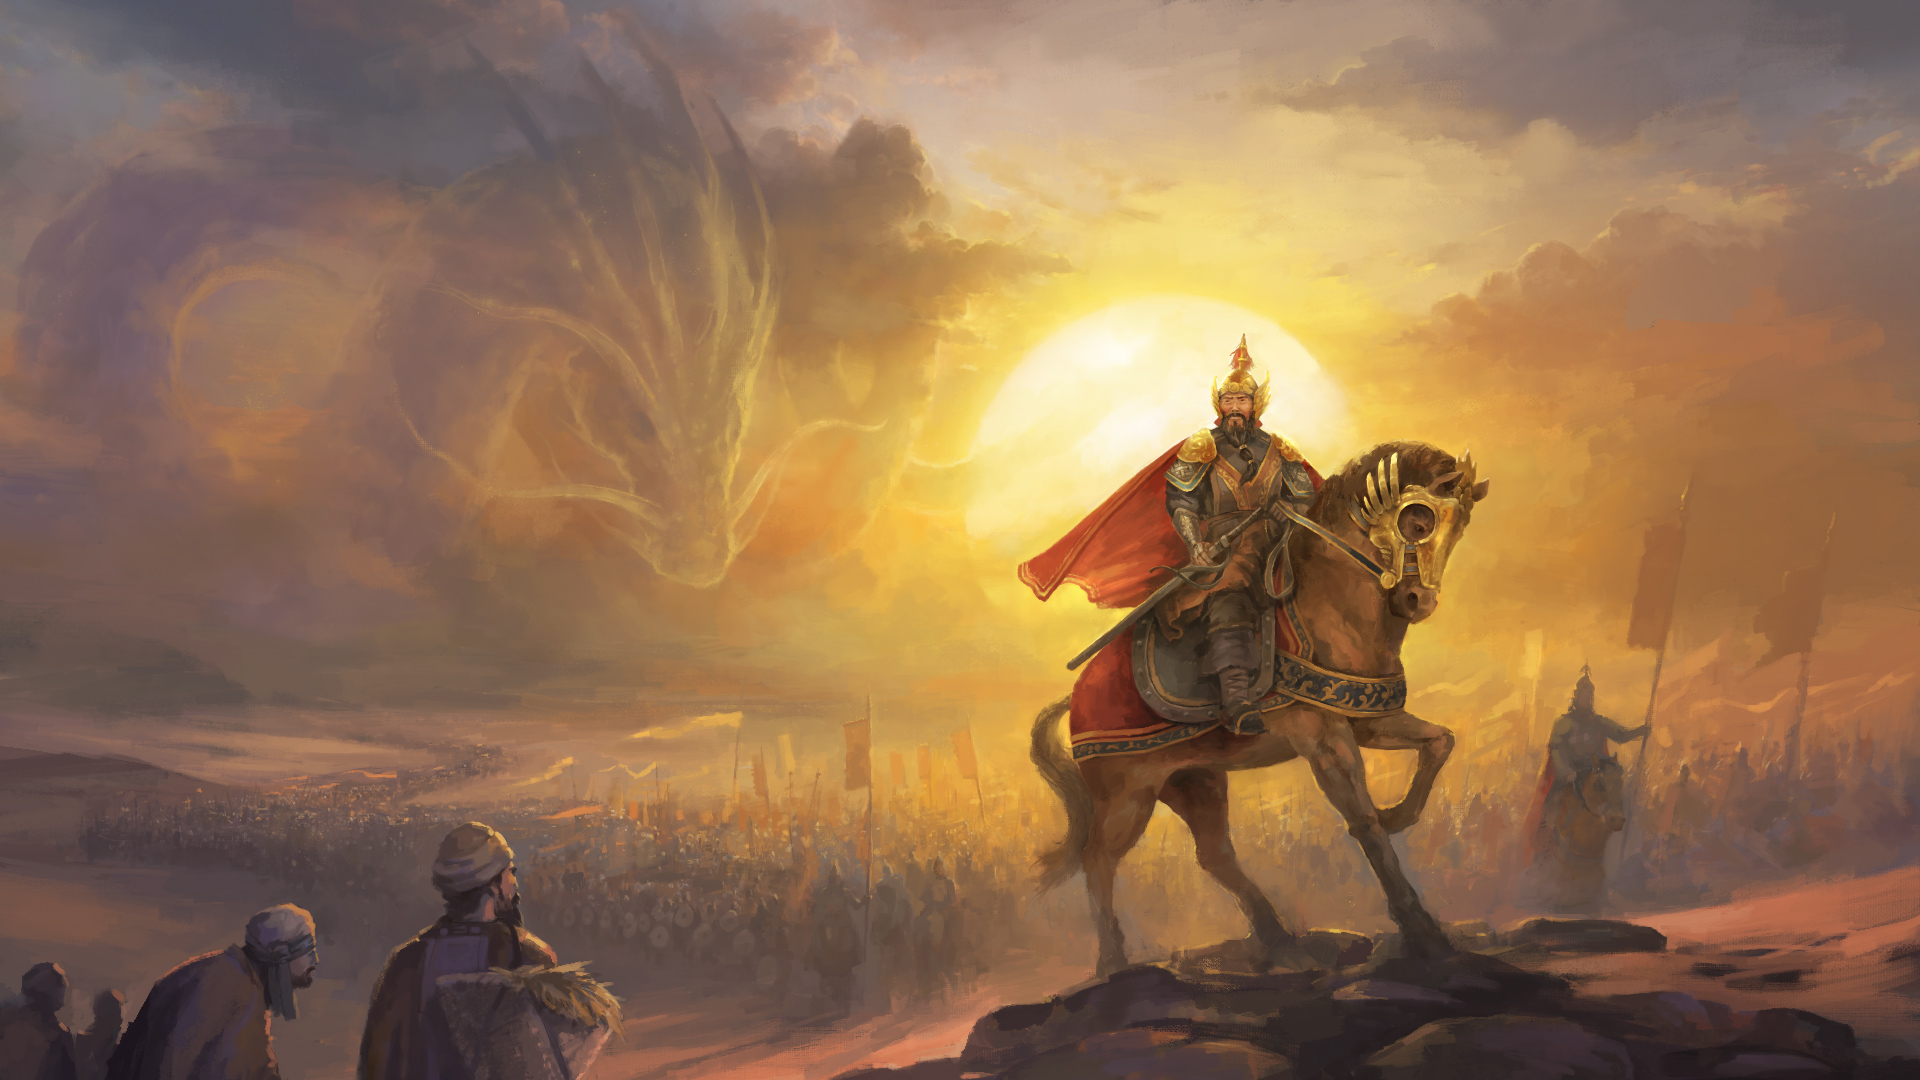 crusader kings 3 console release